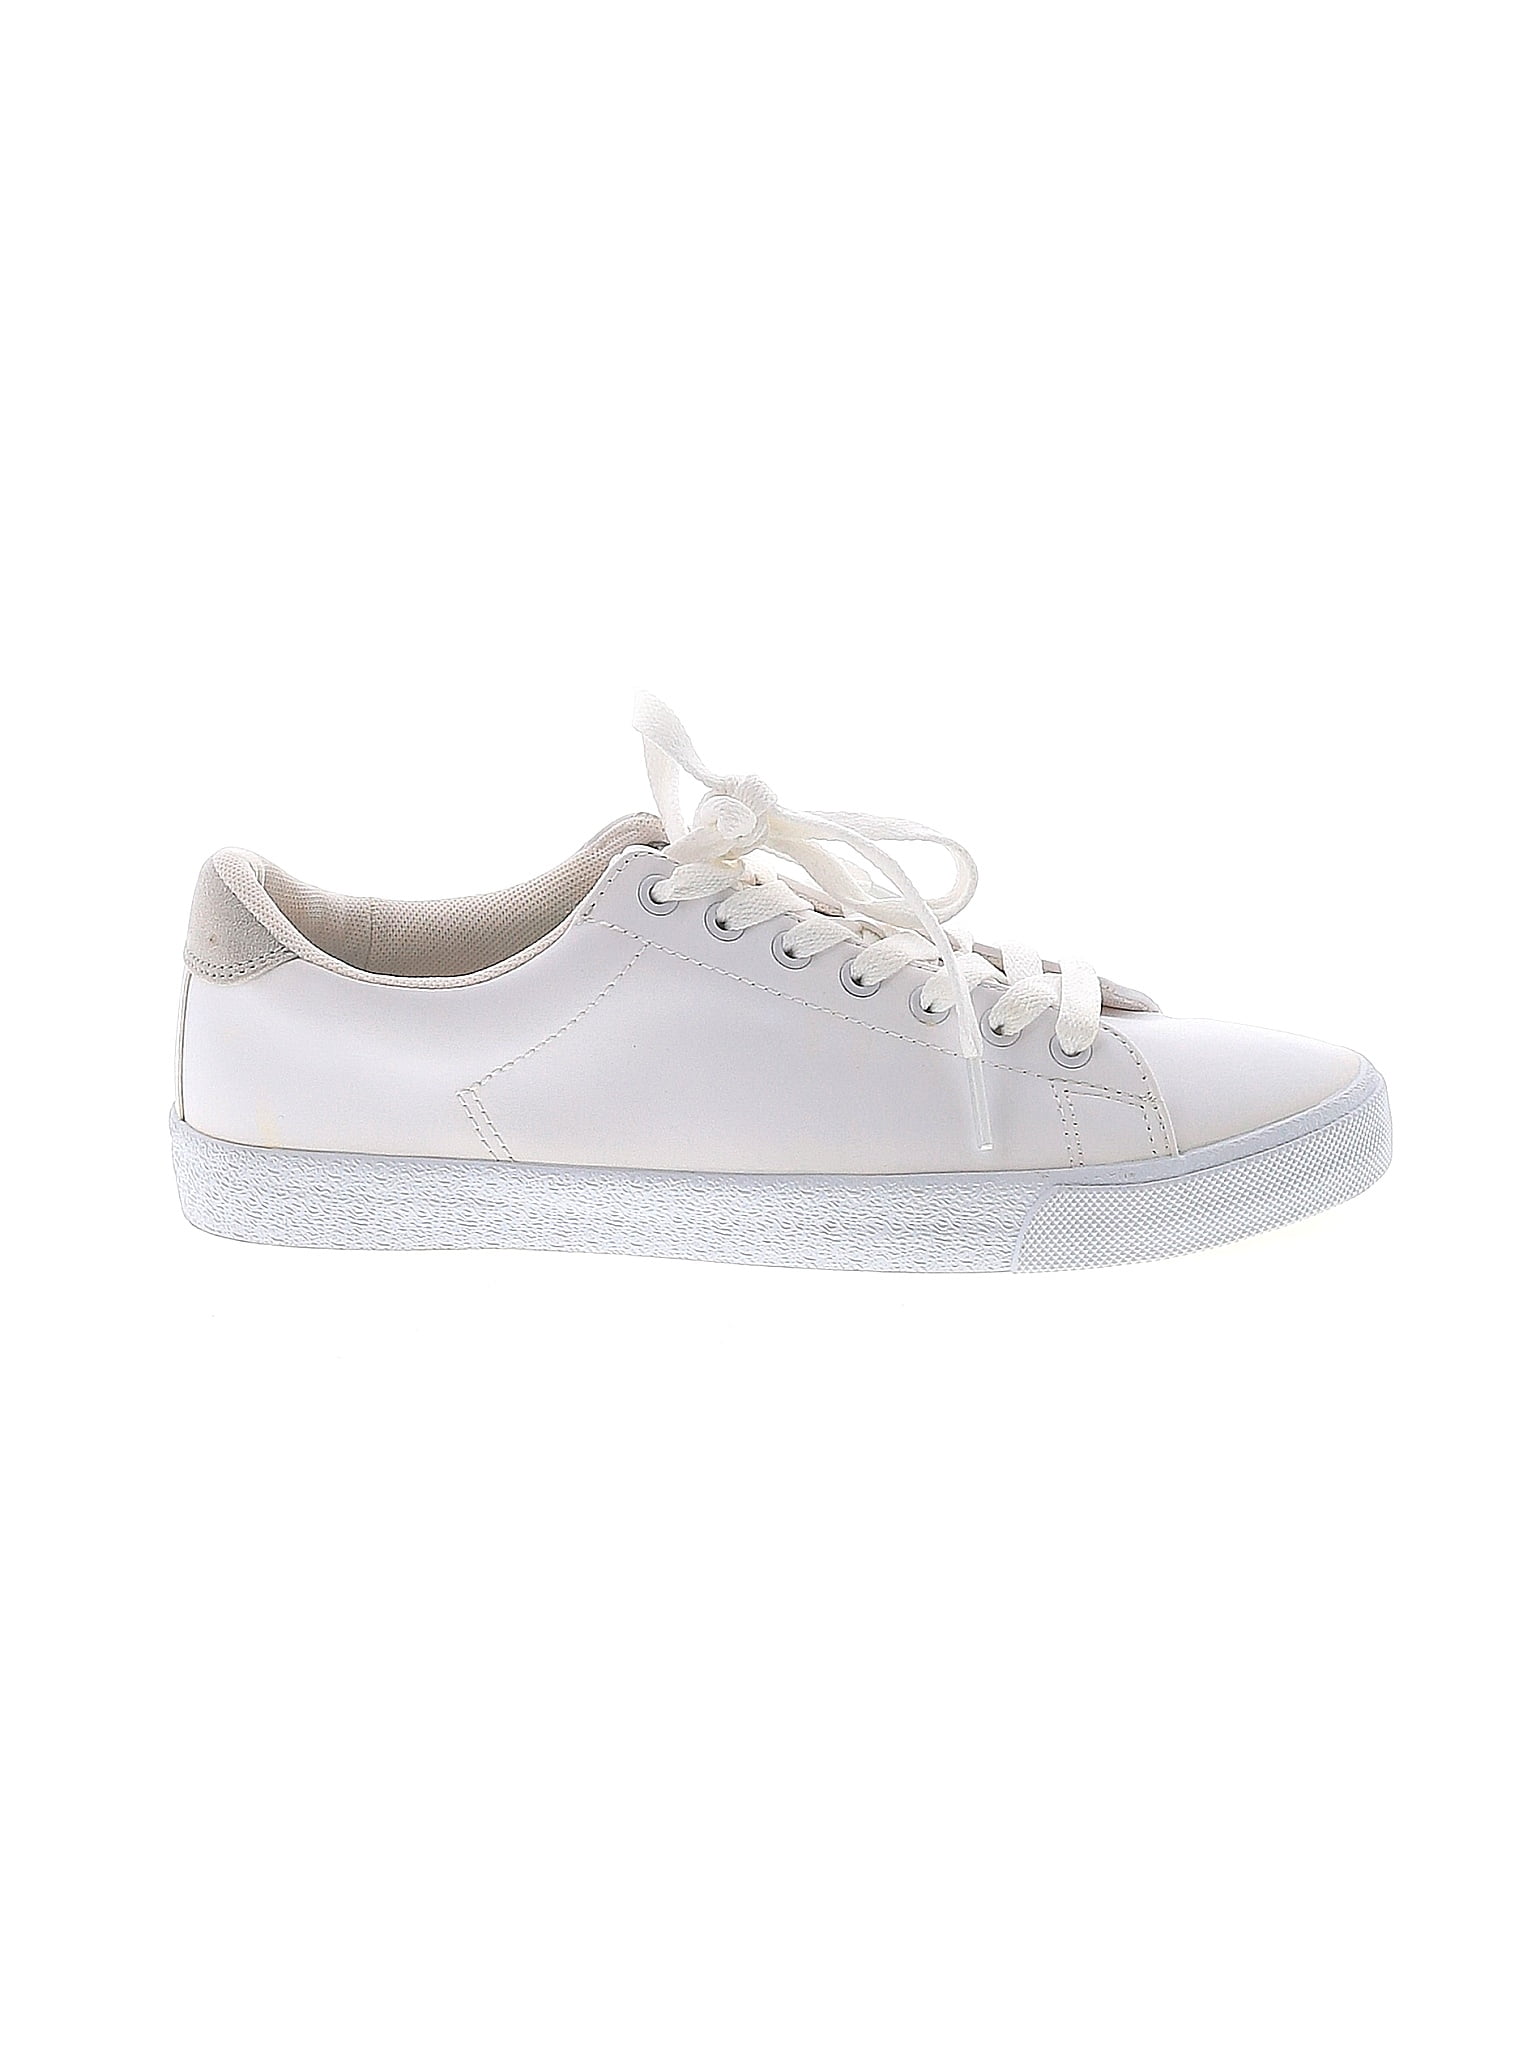 H&M White Sneakers Size 7 1/2 - 34% off | thredUP